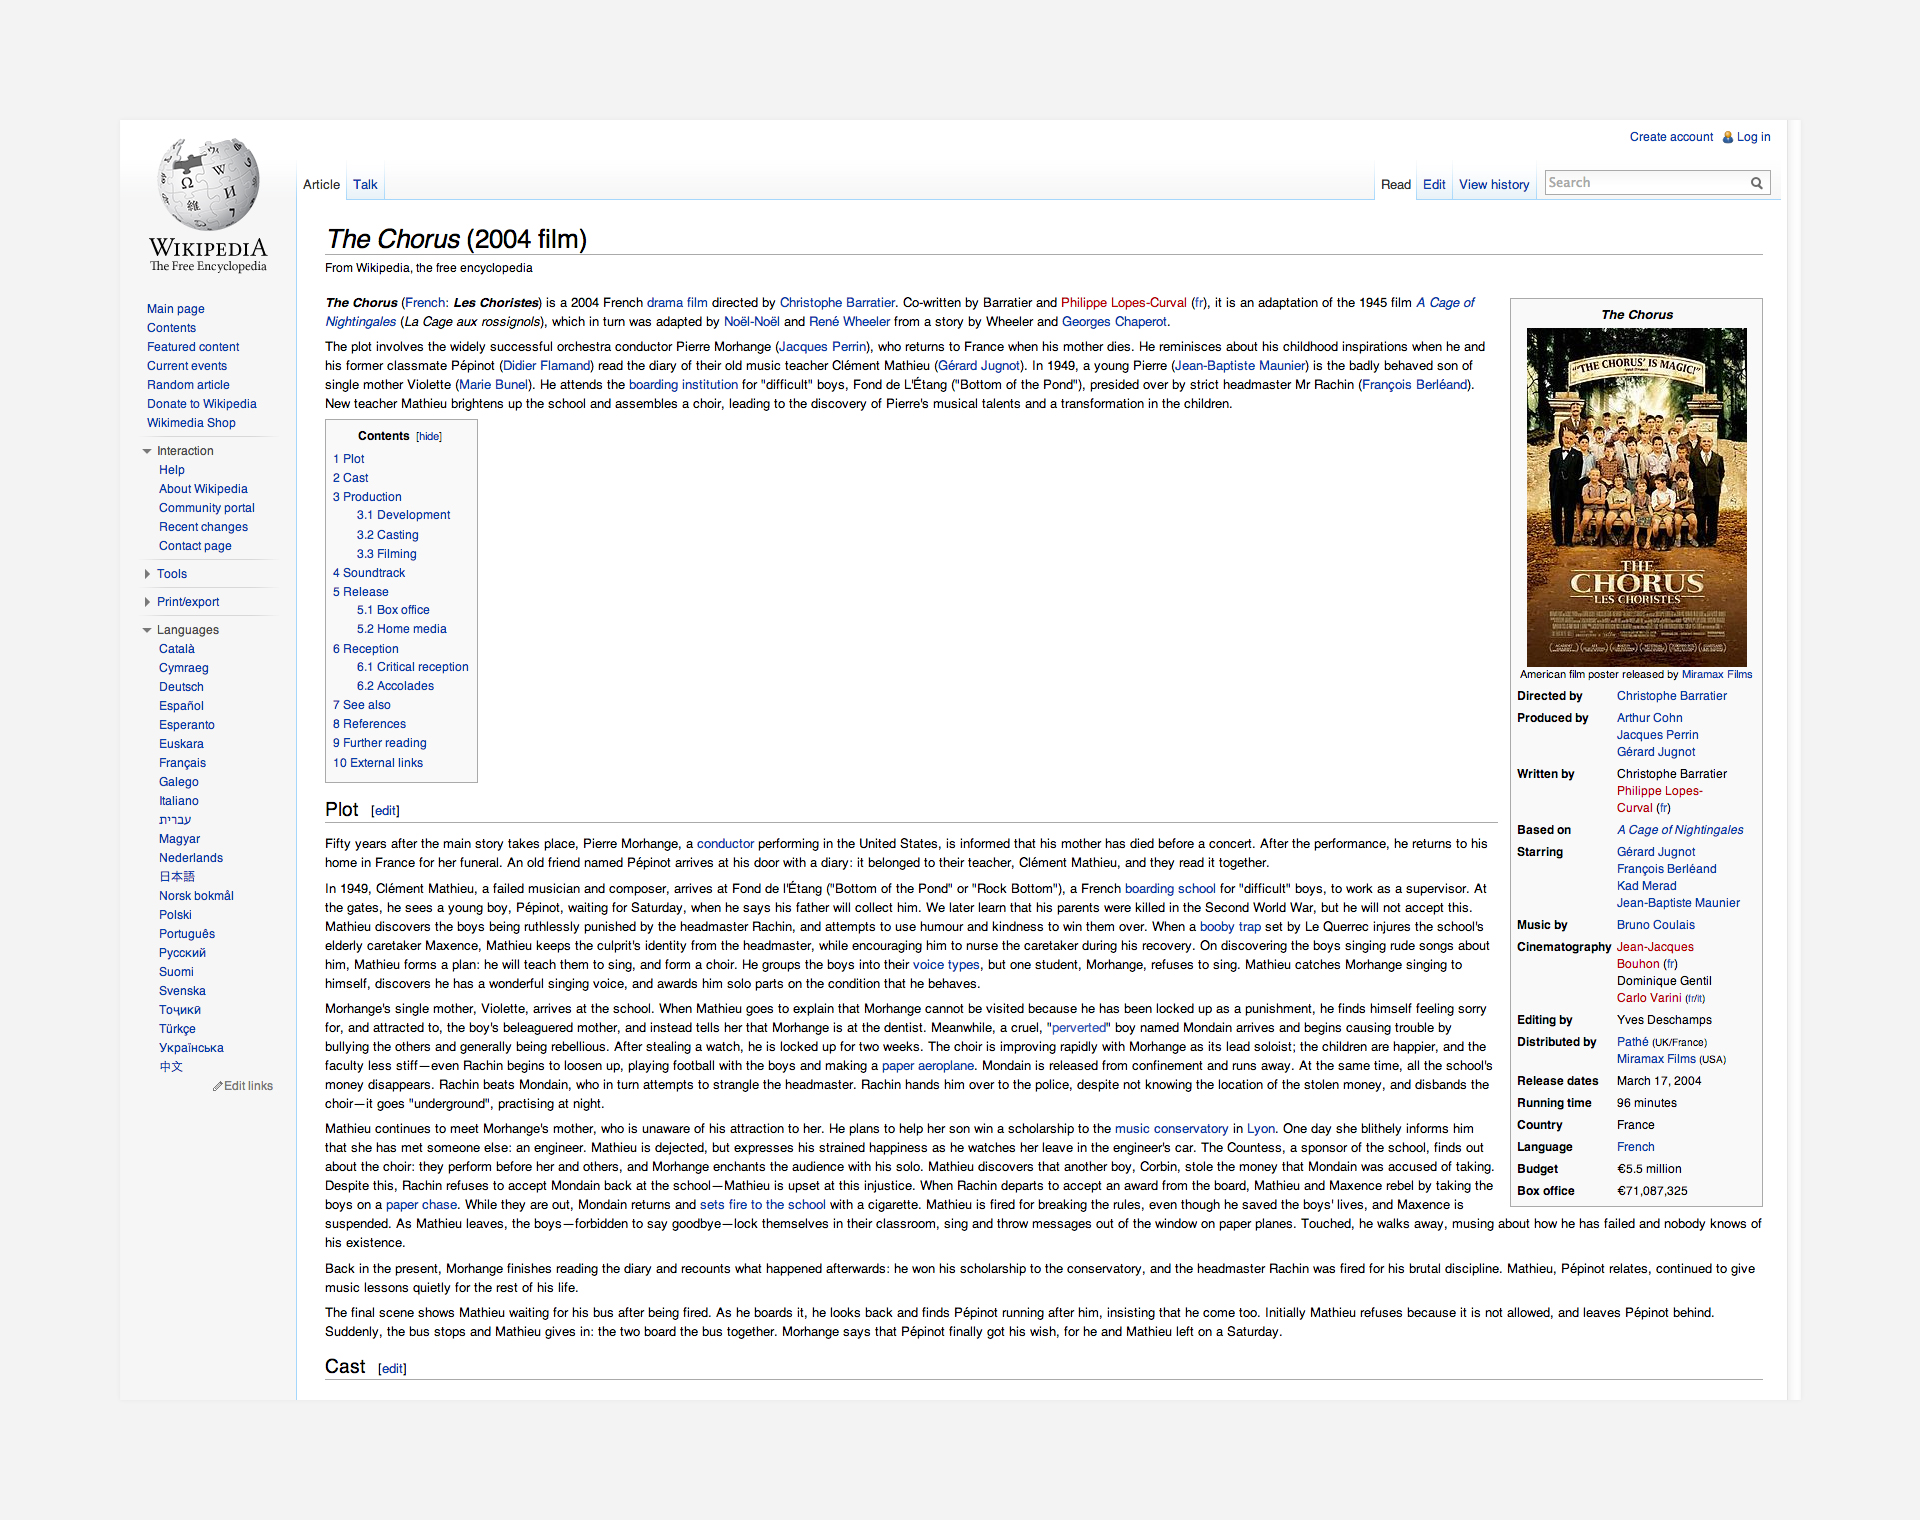 How To Make A More Readable Wikipedia